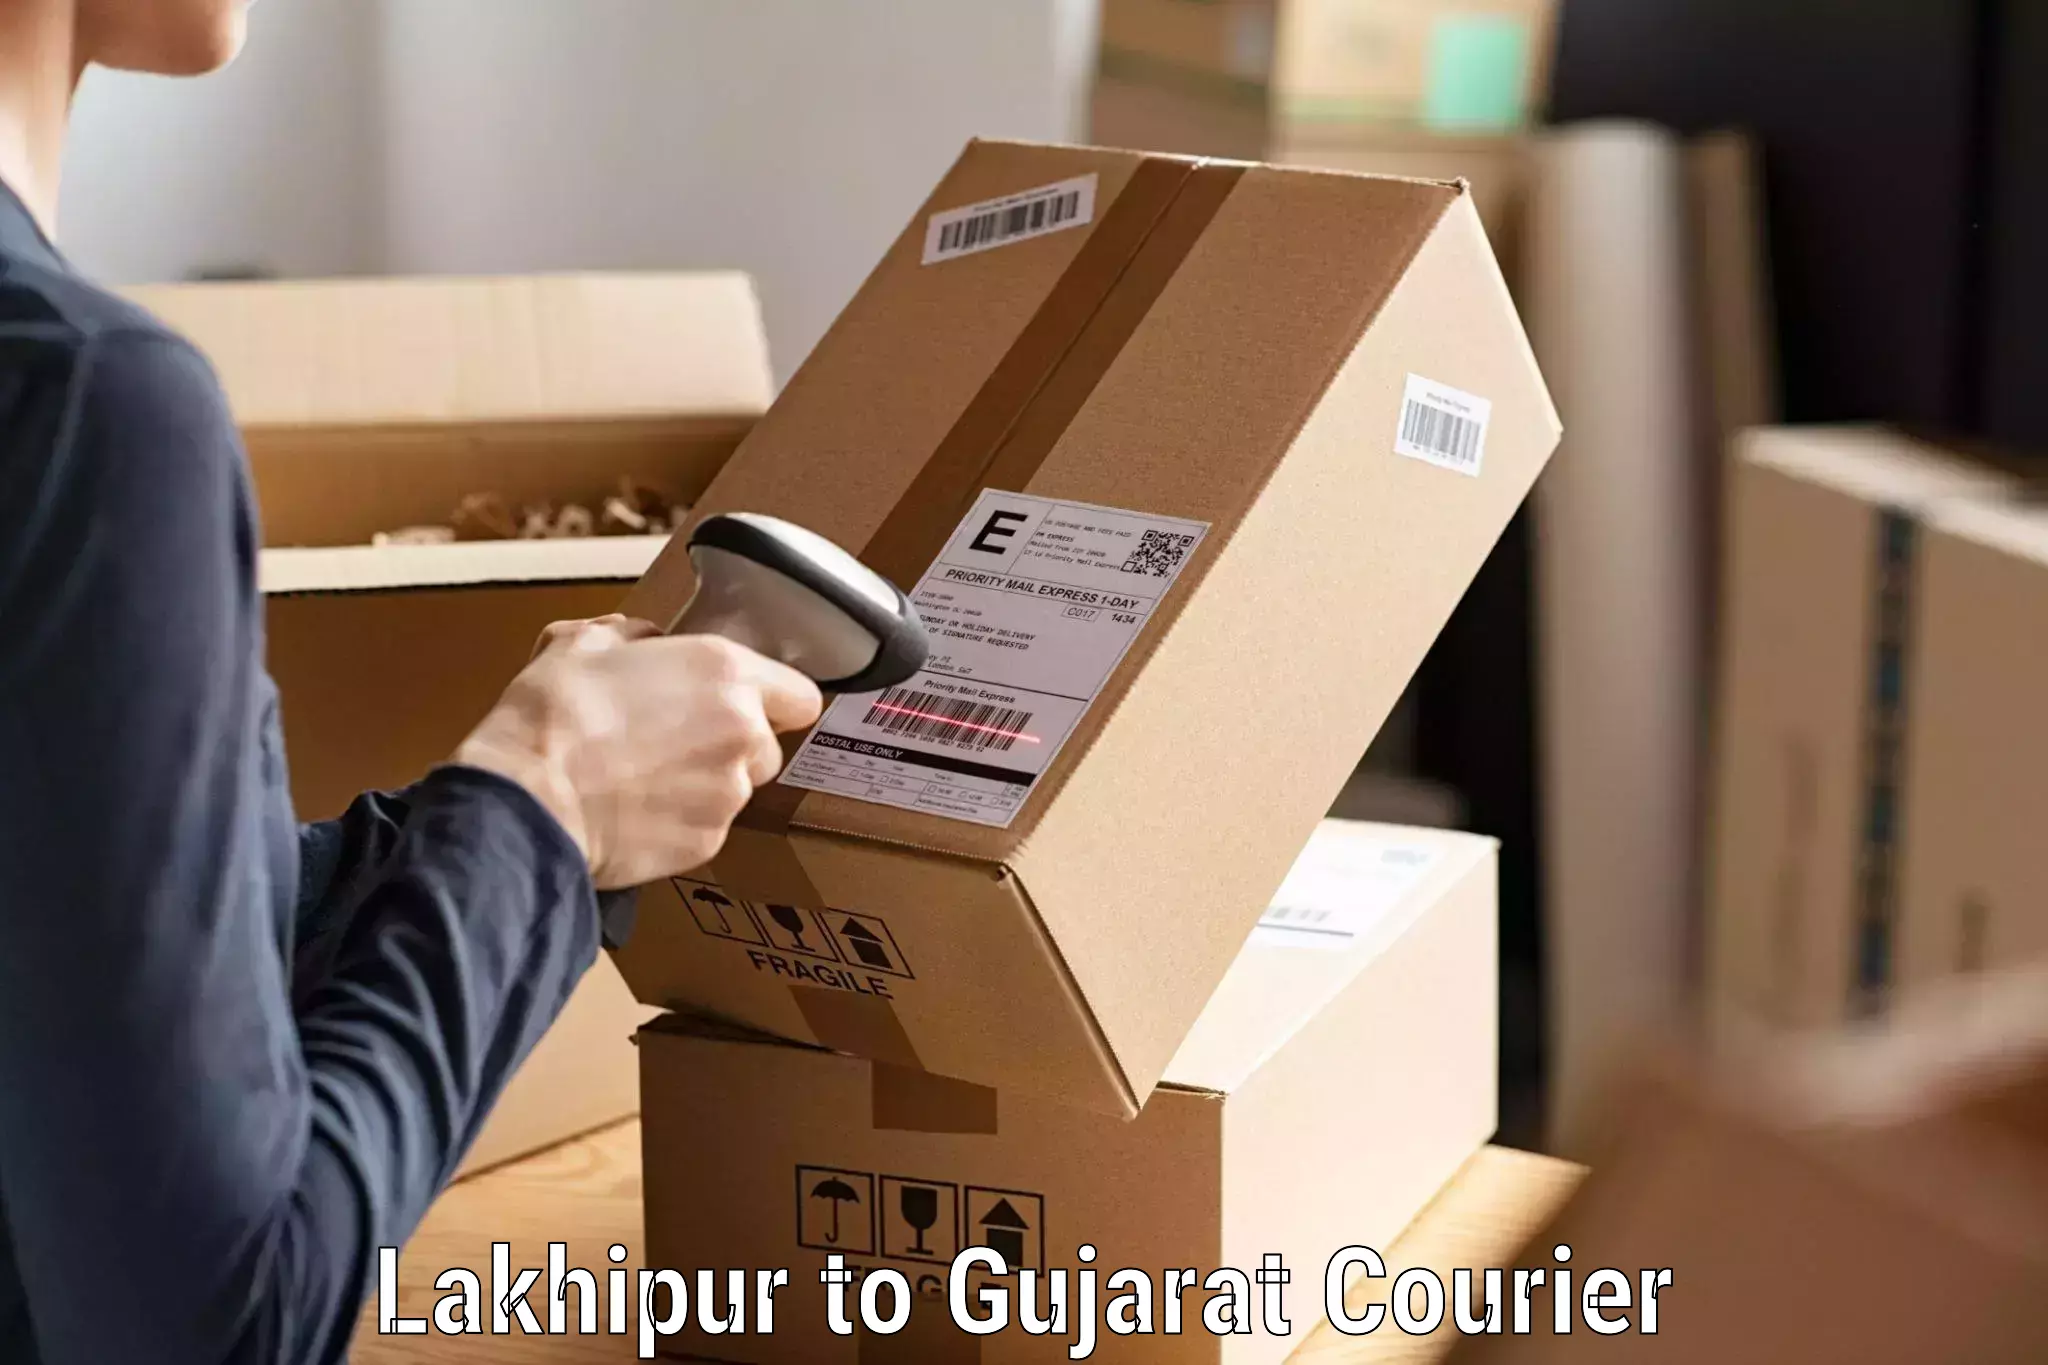 Courier service comparison Lakhipur to Tapi